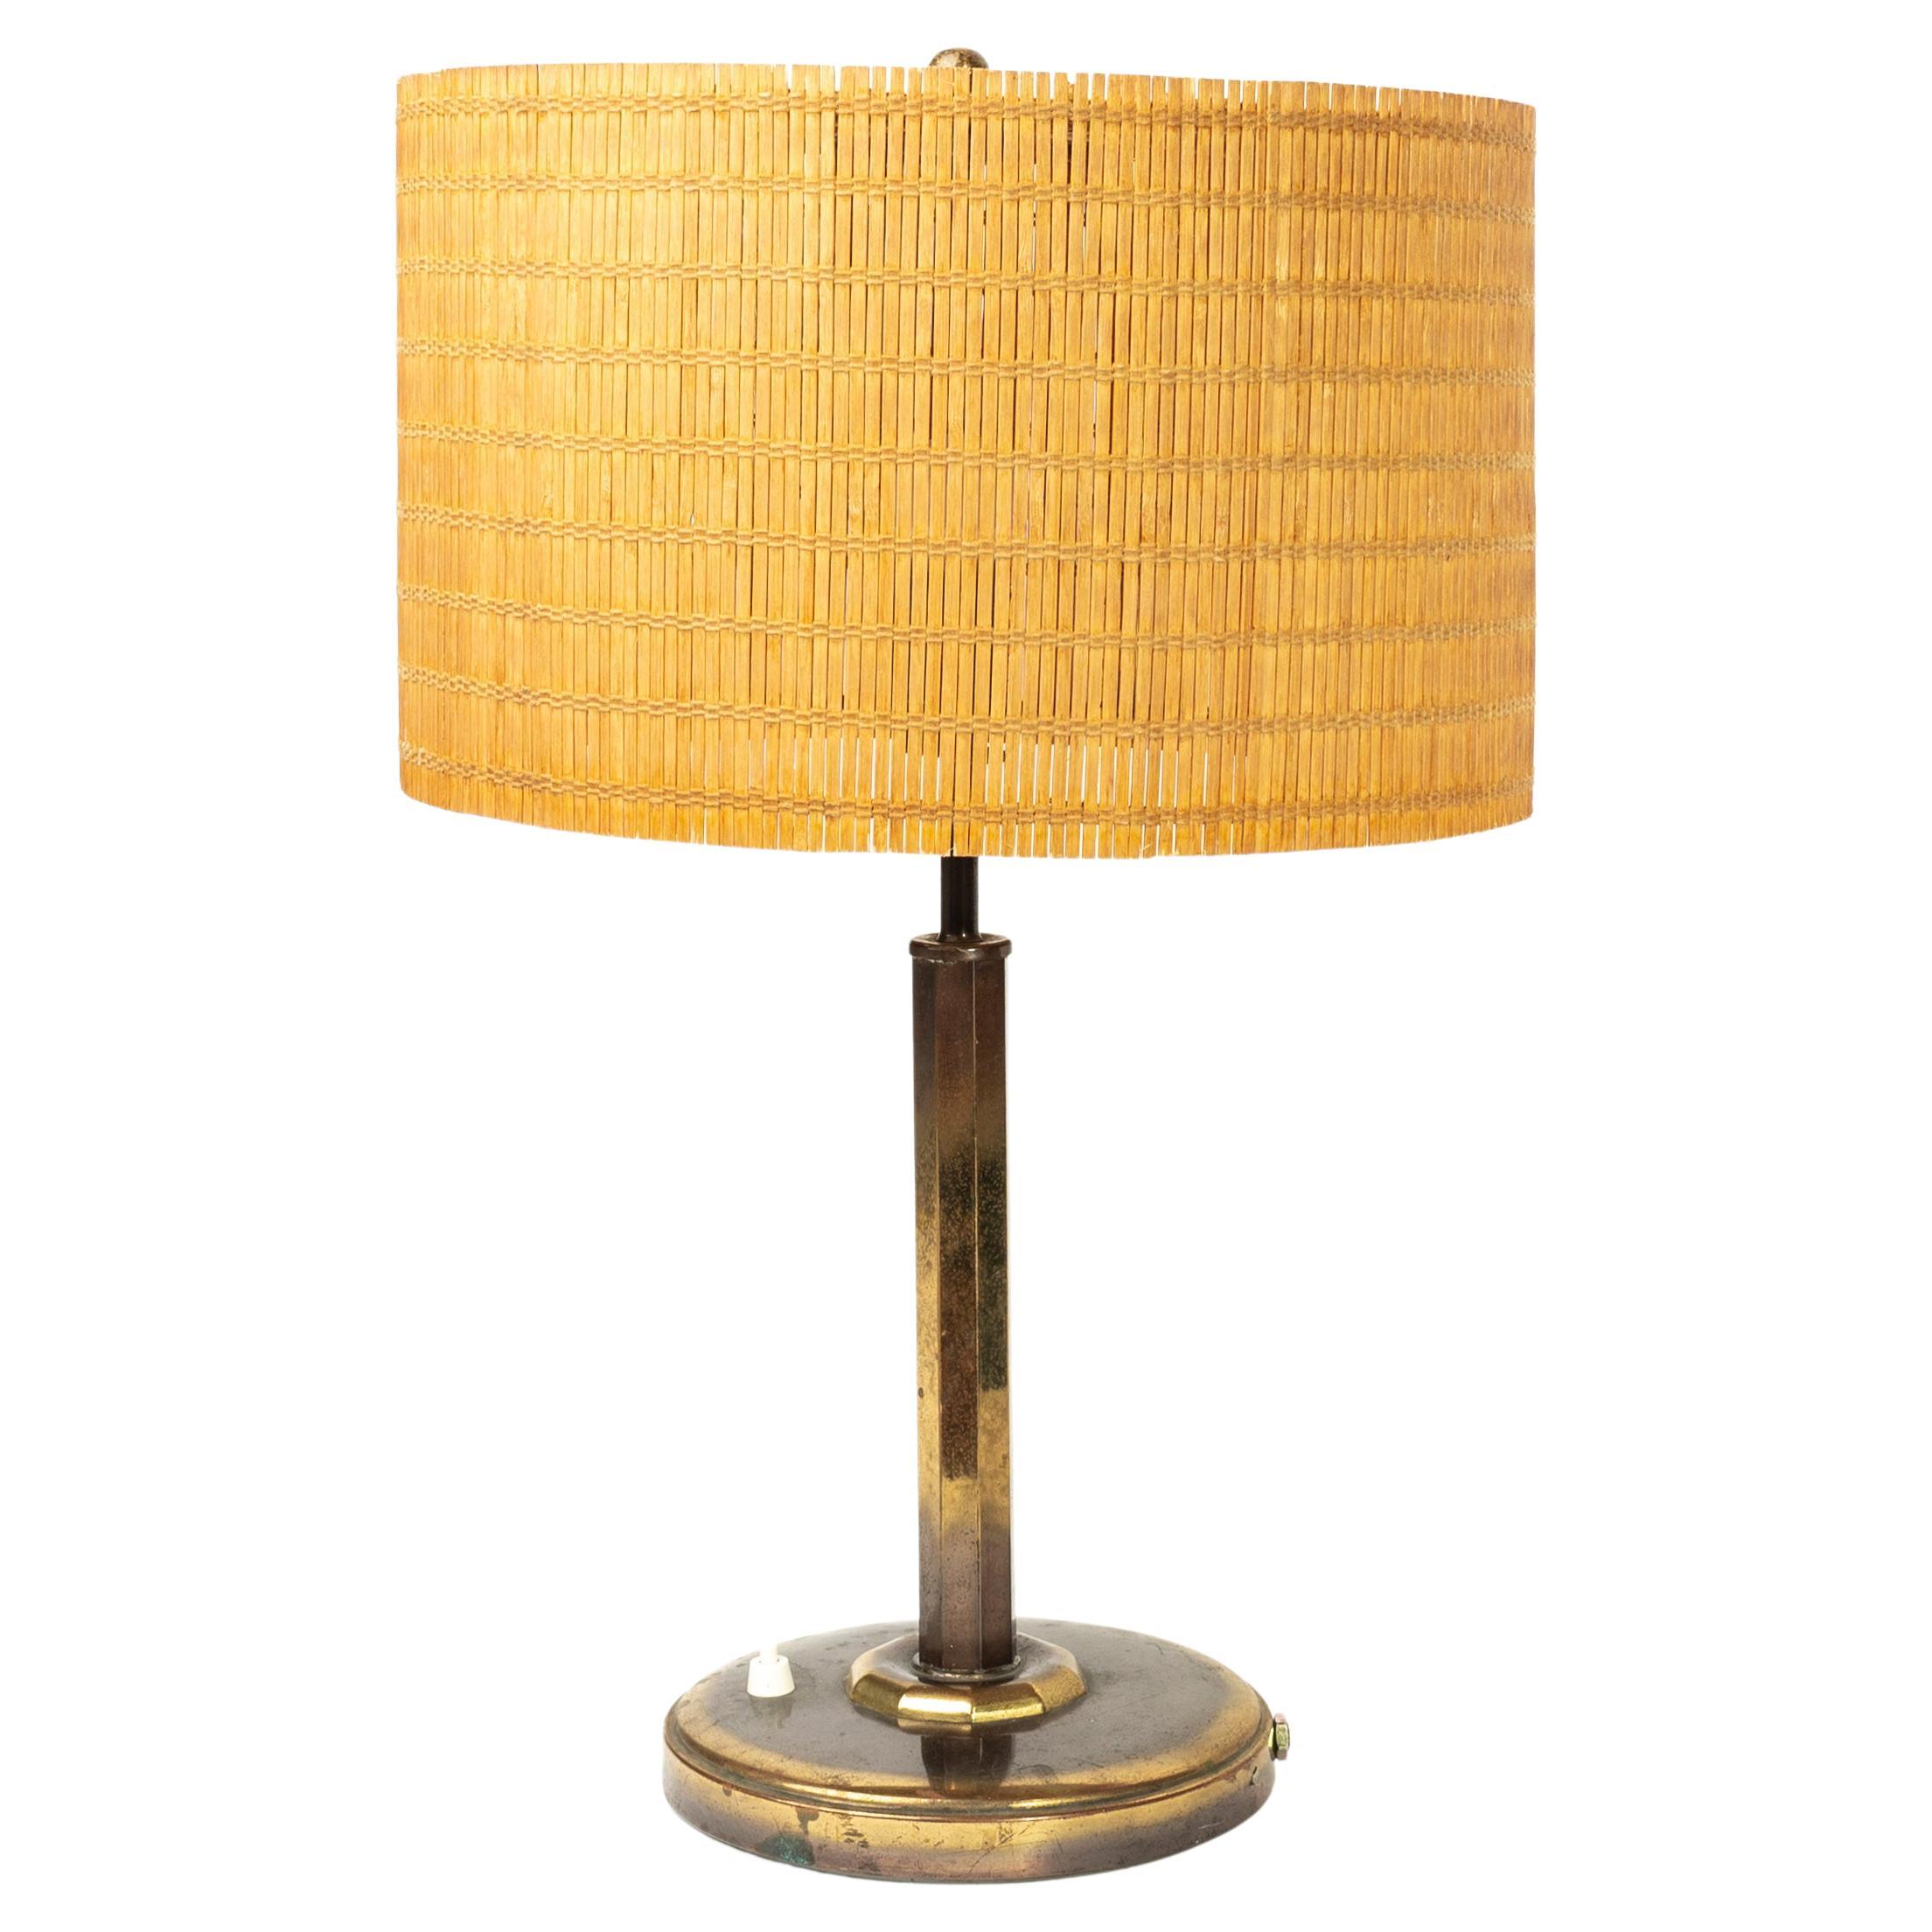 Finnish Table Lamp in Paavo Tynell Style, Wood Strip Shade and Brass, 1950s For Sale